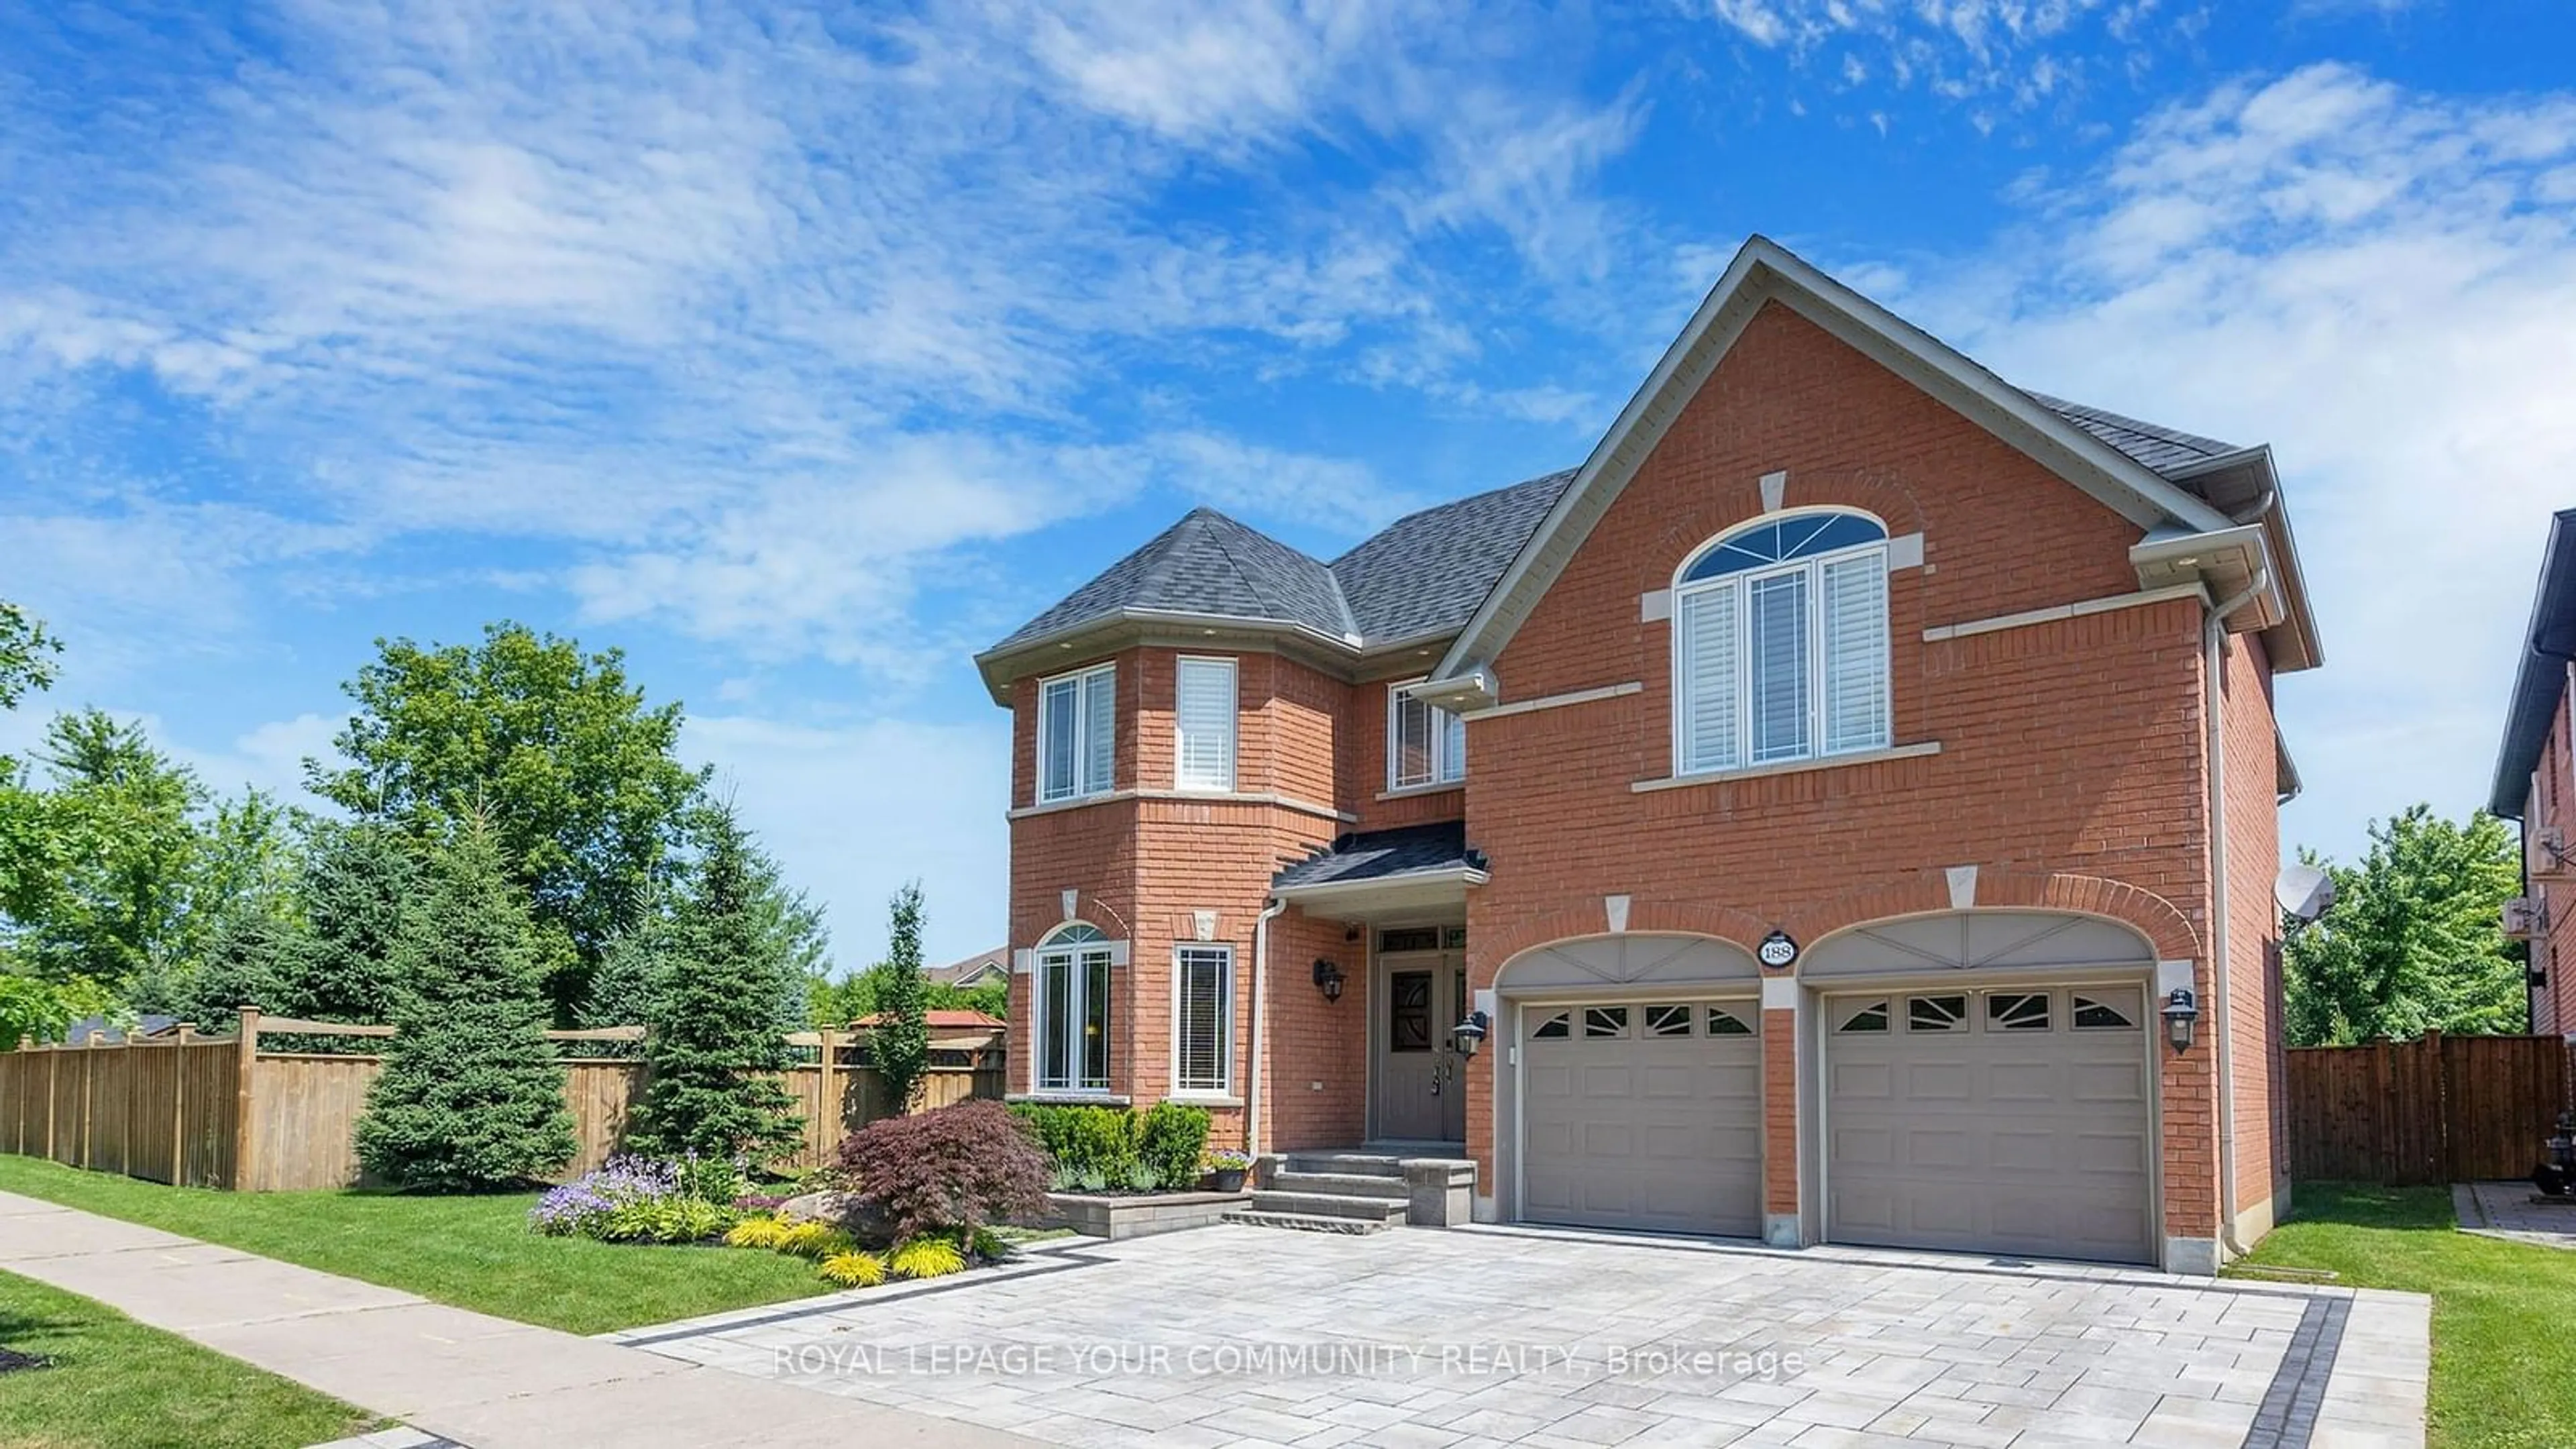 Home with brick exterior material for 188 Coon's Rd, Richmond Hill Ontario L4E 4R3